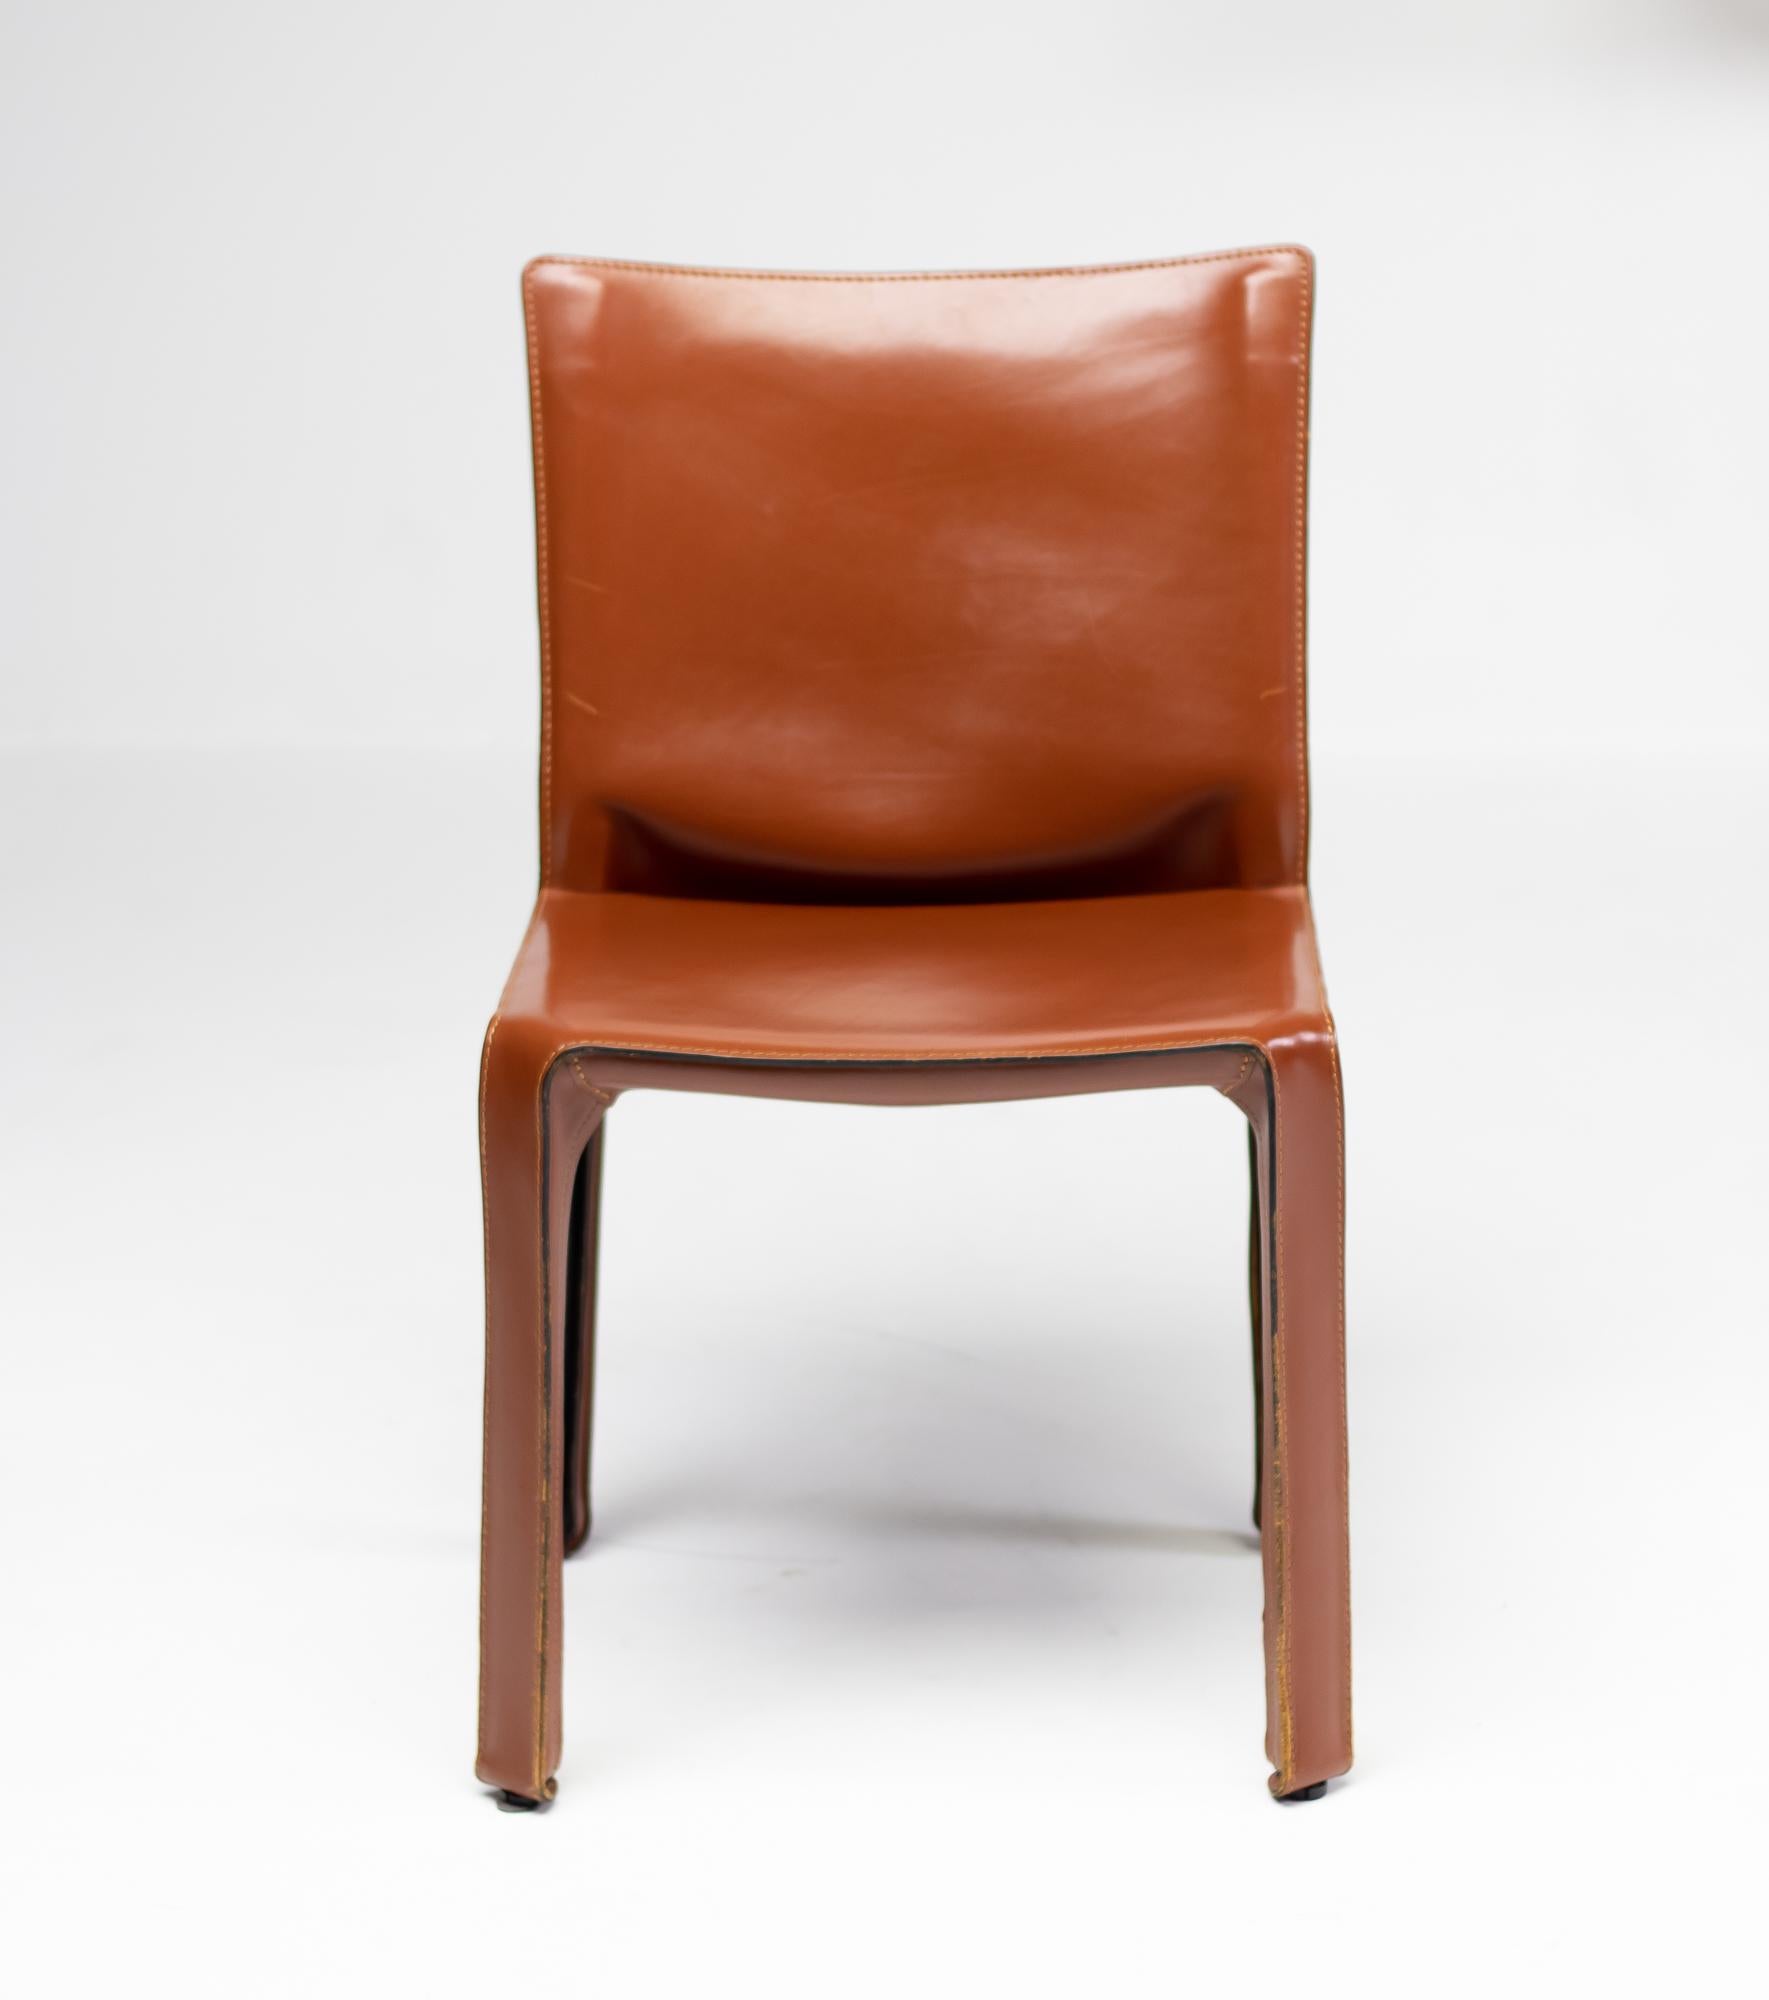 Italian Set of Six Mario Bellini Cab Chairs for Cassina in Cognac Saddle Leather